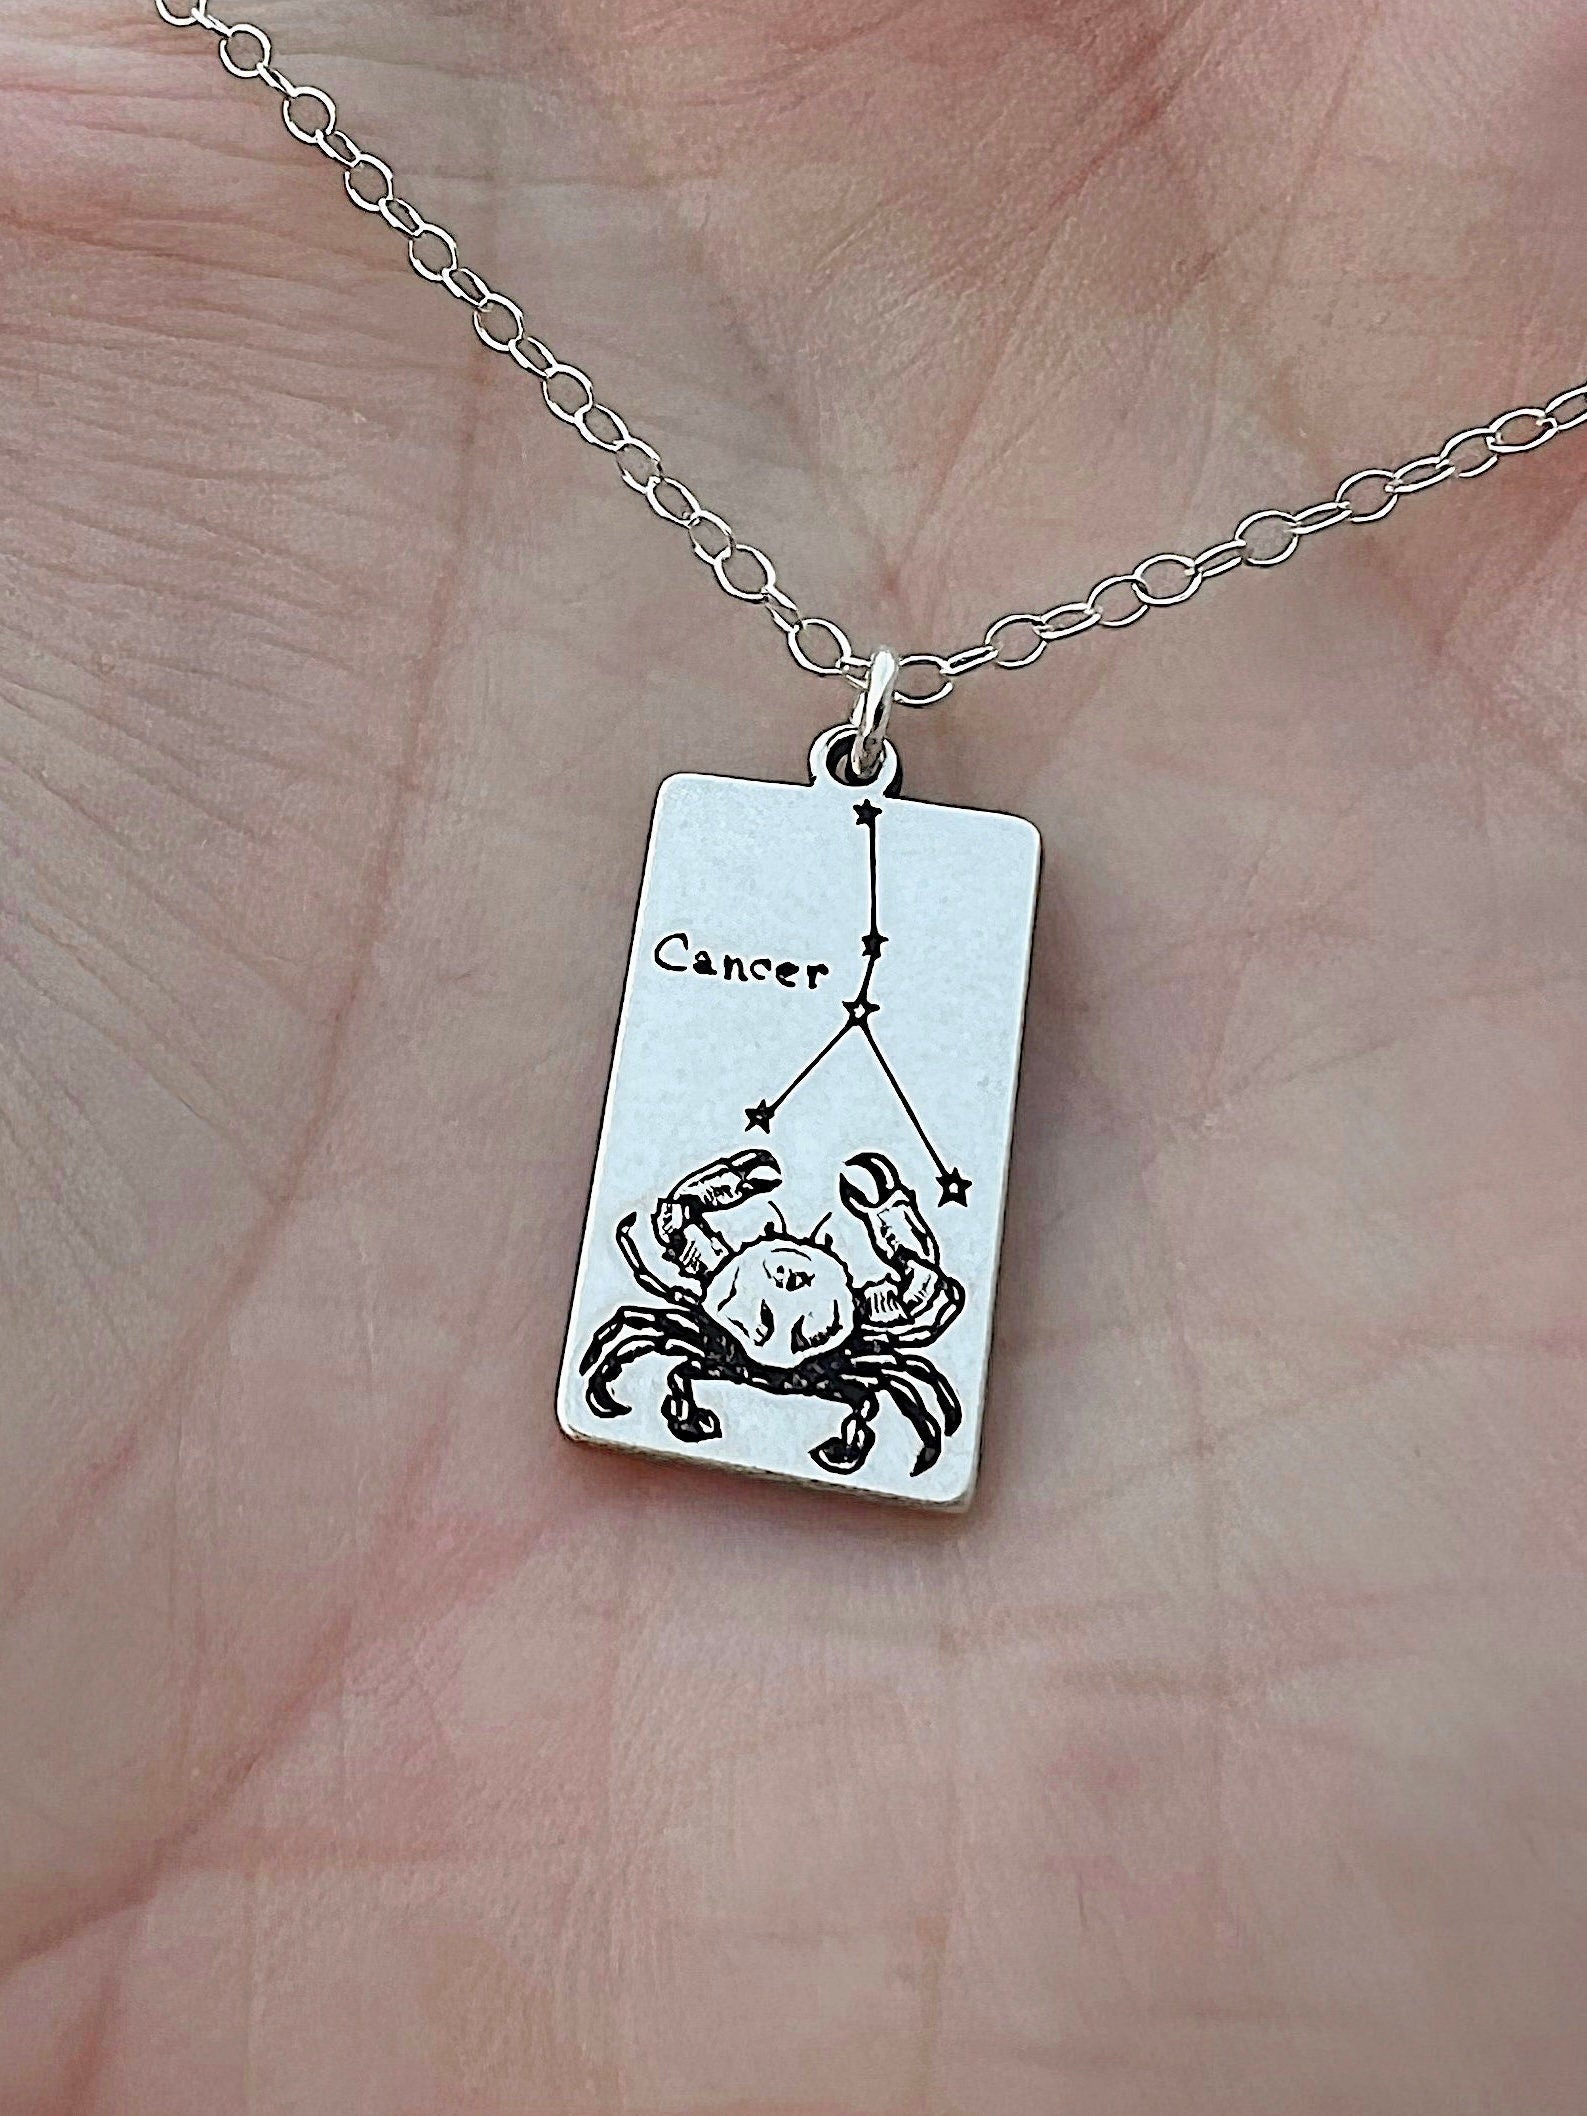 Cancer Zodiac Sign Necklace - Sterling Silver